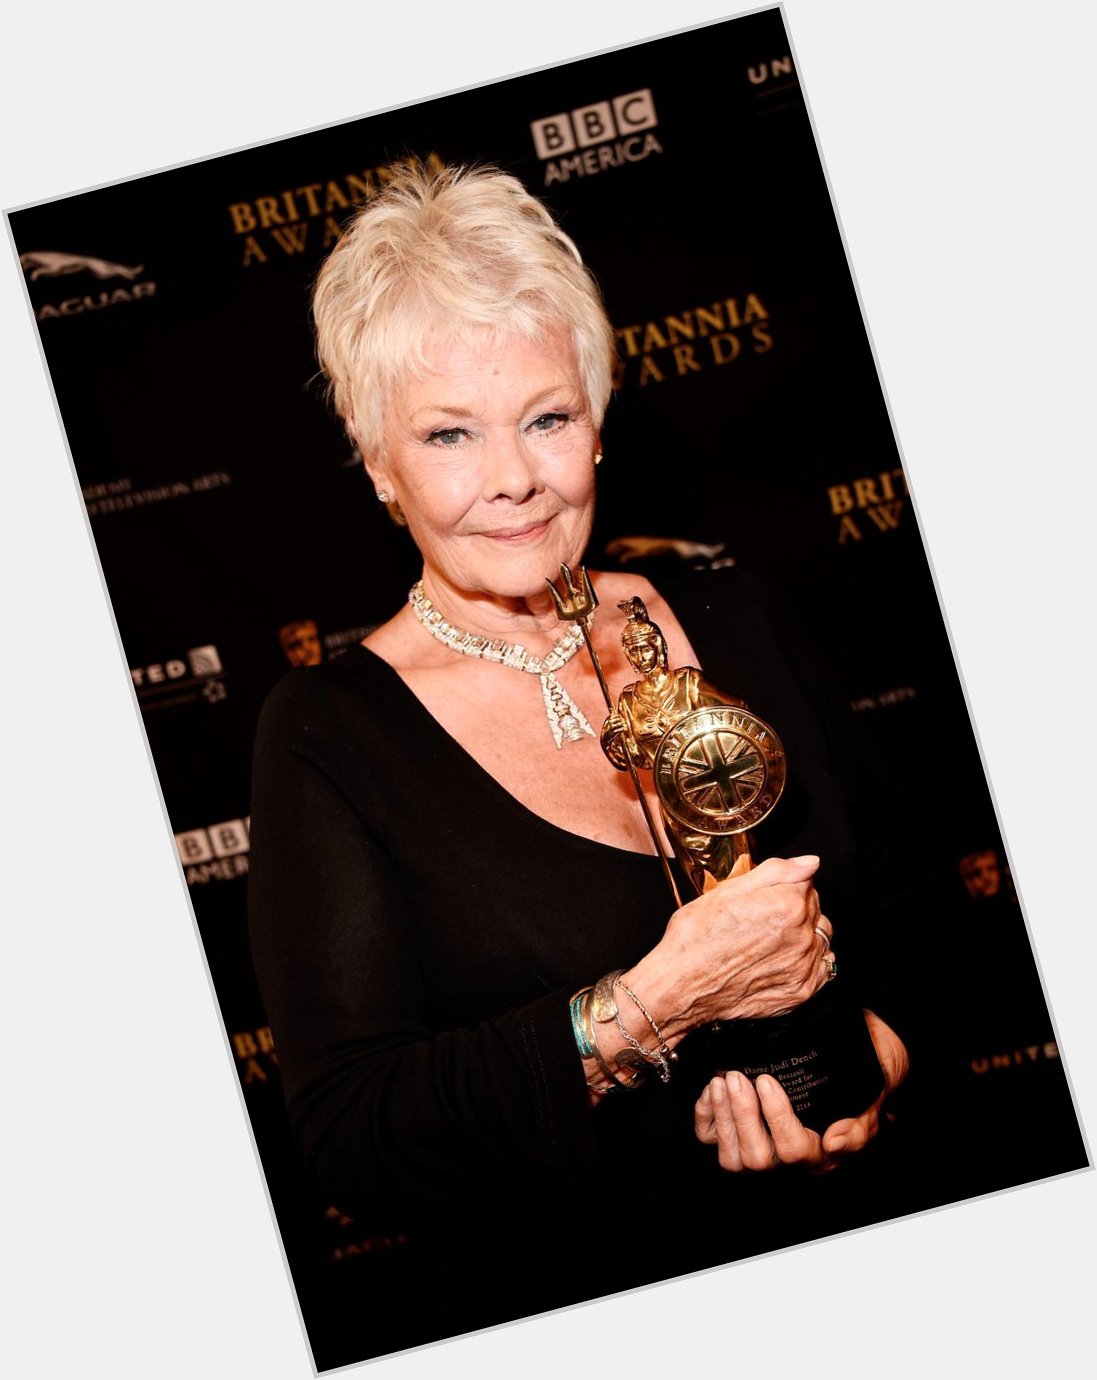 Happy Bday to Dame Judi Dench - here she is with her Britannia Award this year, whats your fav Judi role? 